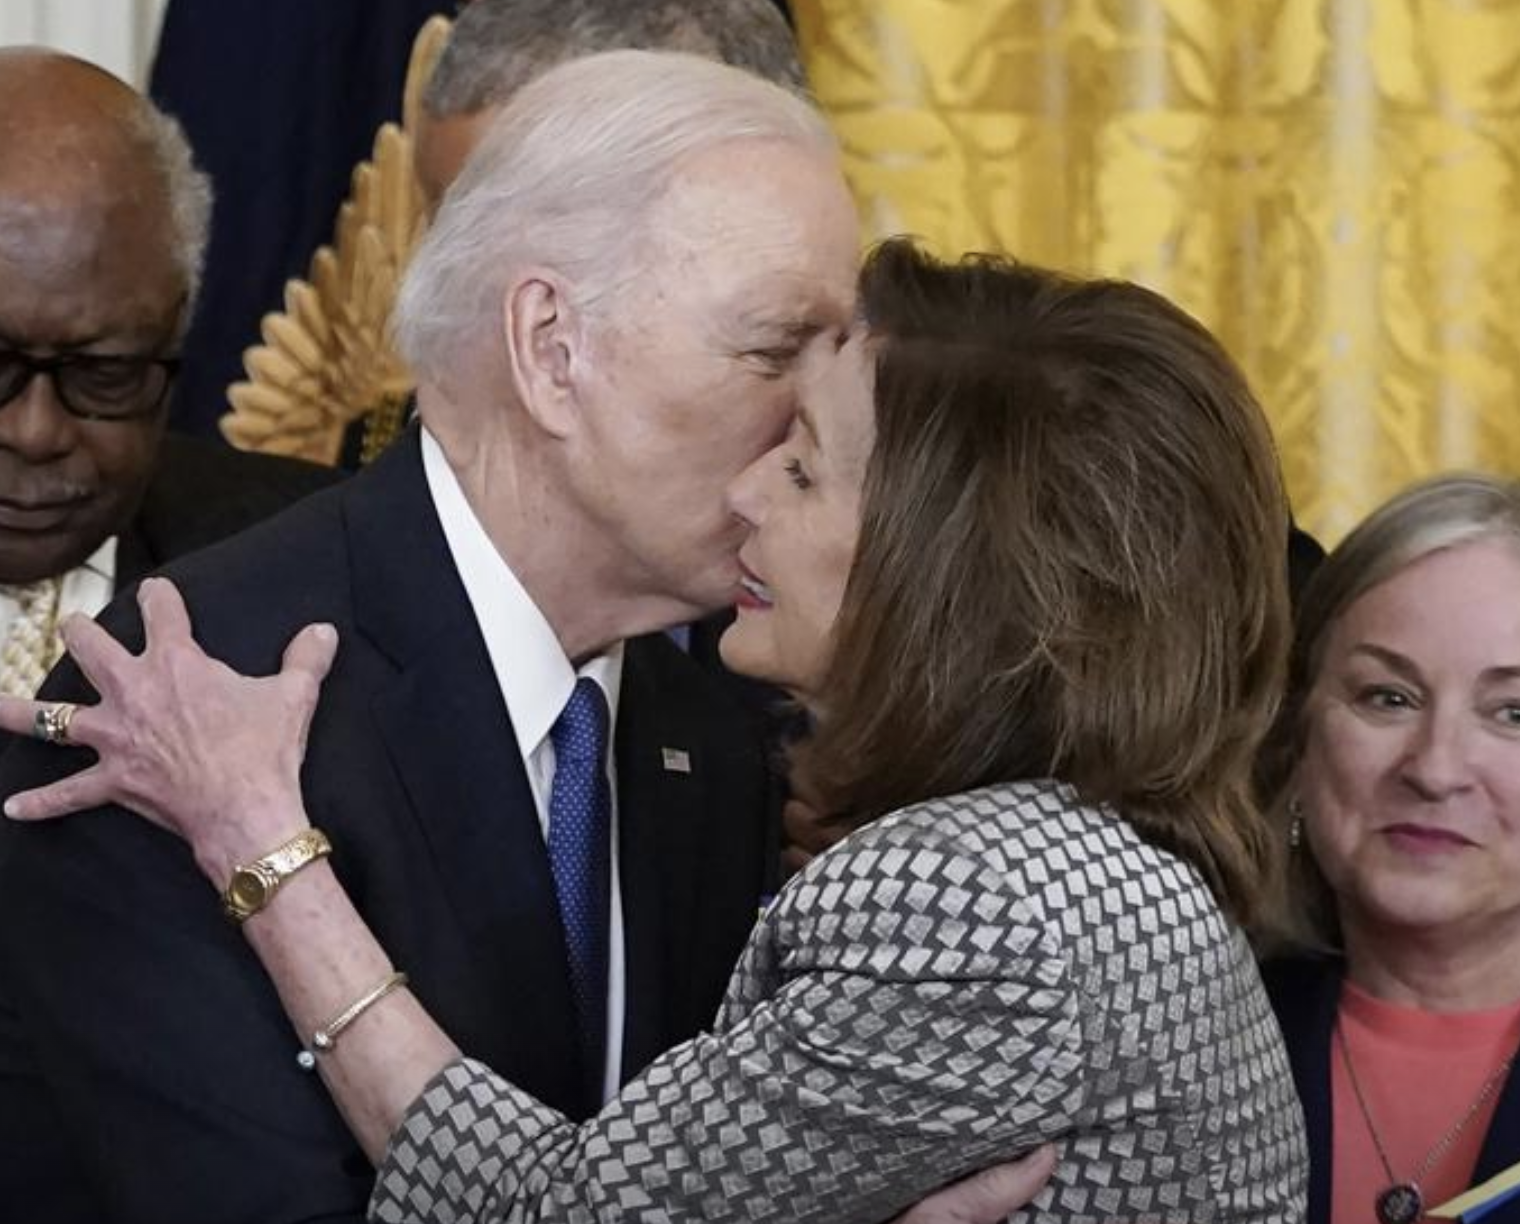 President Joe Biden kisses House Speaker Nancy Pelosi of Calif., during an Affordable Care Act event in the East Room of the White House in Washington, Tuesday, April 5, 2022. At left is House Majority Whip James Clyburn, D-S.C., and right is Rep. Susan Wild, D-Pa. Pelosi has tested positive for COVID-19 and is currently asymptomatic, her spokesman Drew Hammill said in a tweet Thursday, April 7. (AP Photo/Carolyn Kaster)